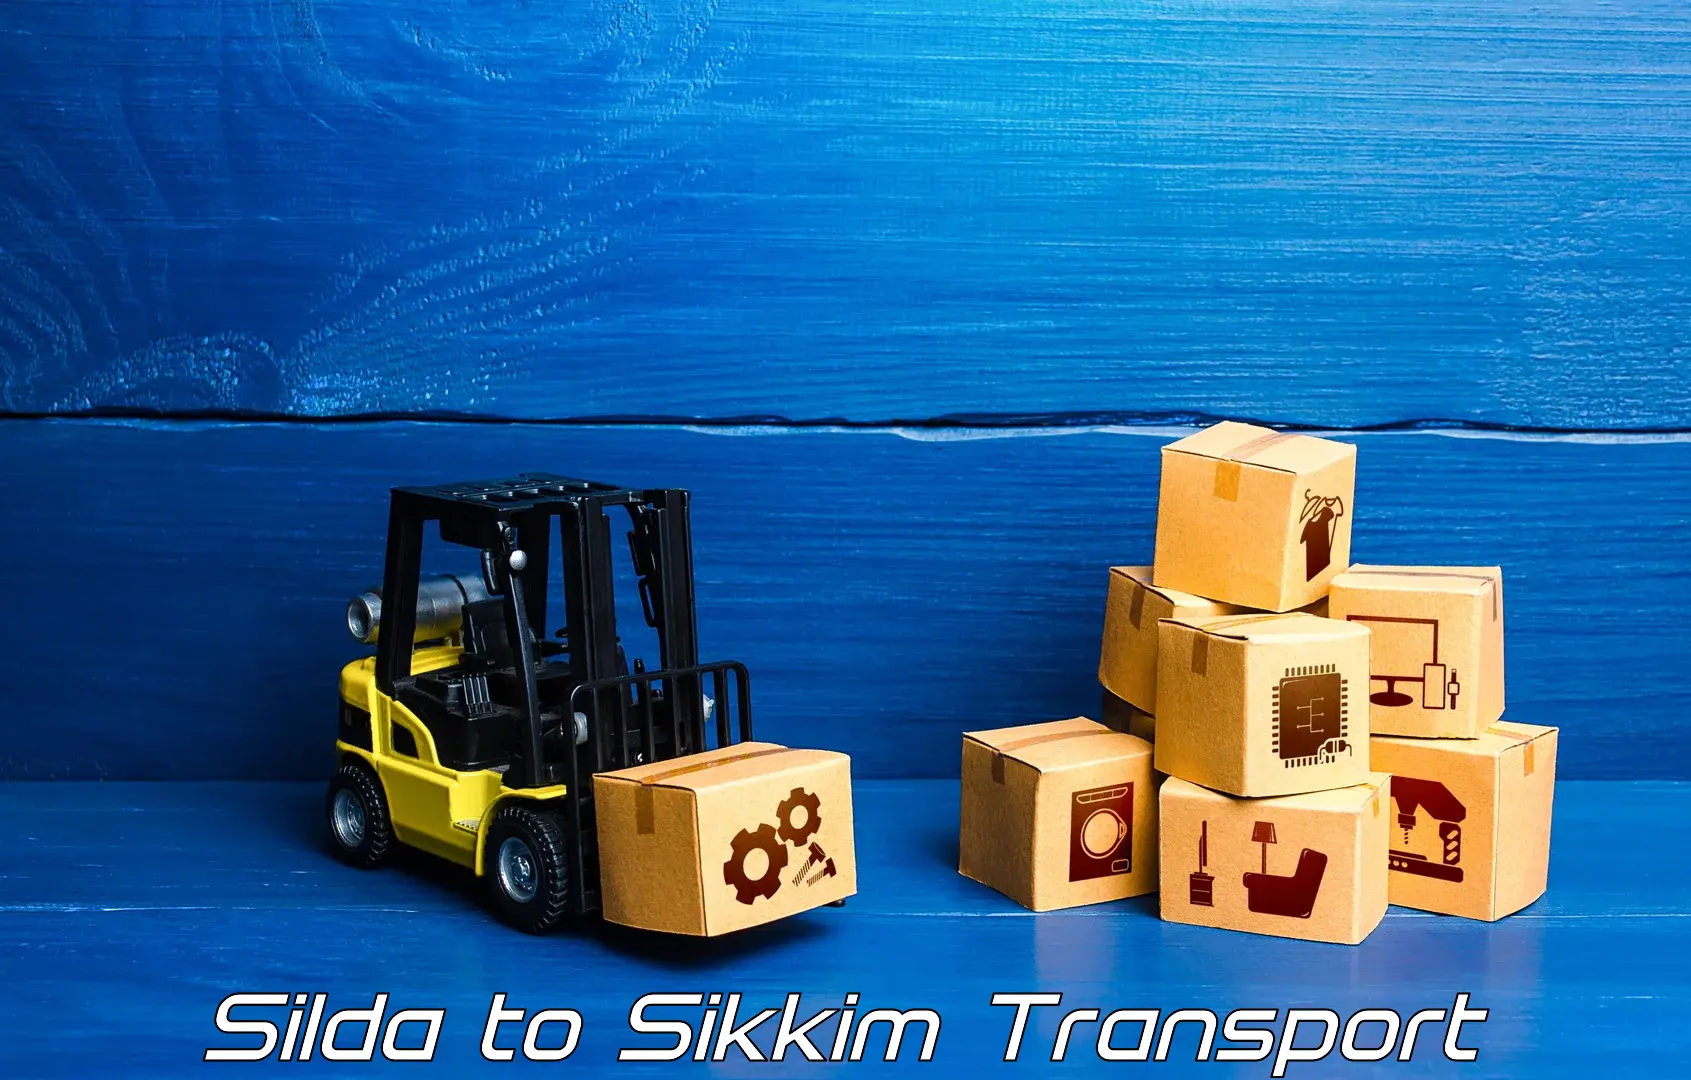 Cargo train transport services Silda to East Sikkim